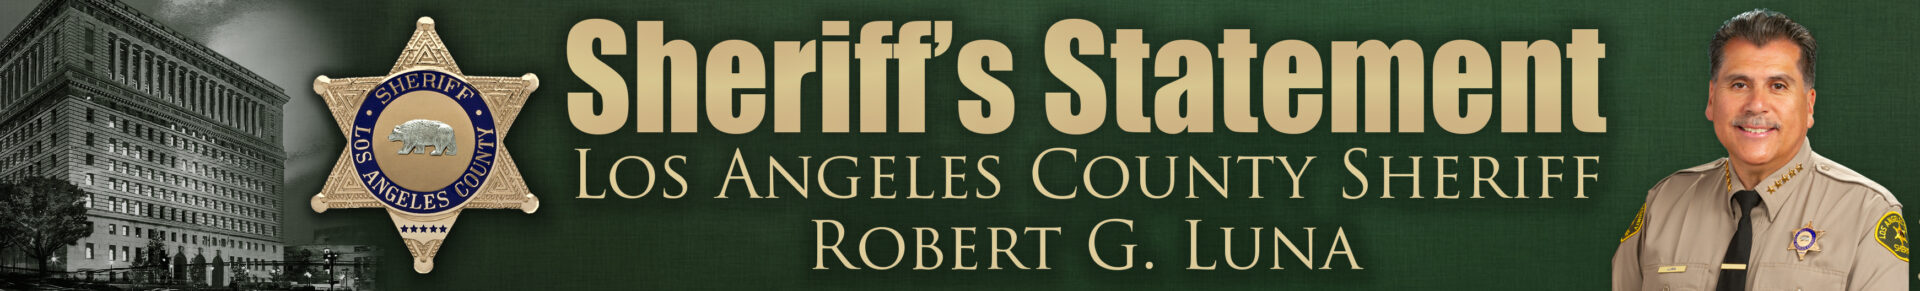 Sheriff's Statement from Los Angeles County Sheriff Robert G. Luna. Image of Luna in uniform, tan shirt with black tie, Against a green background.